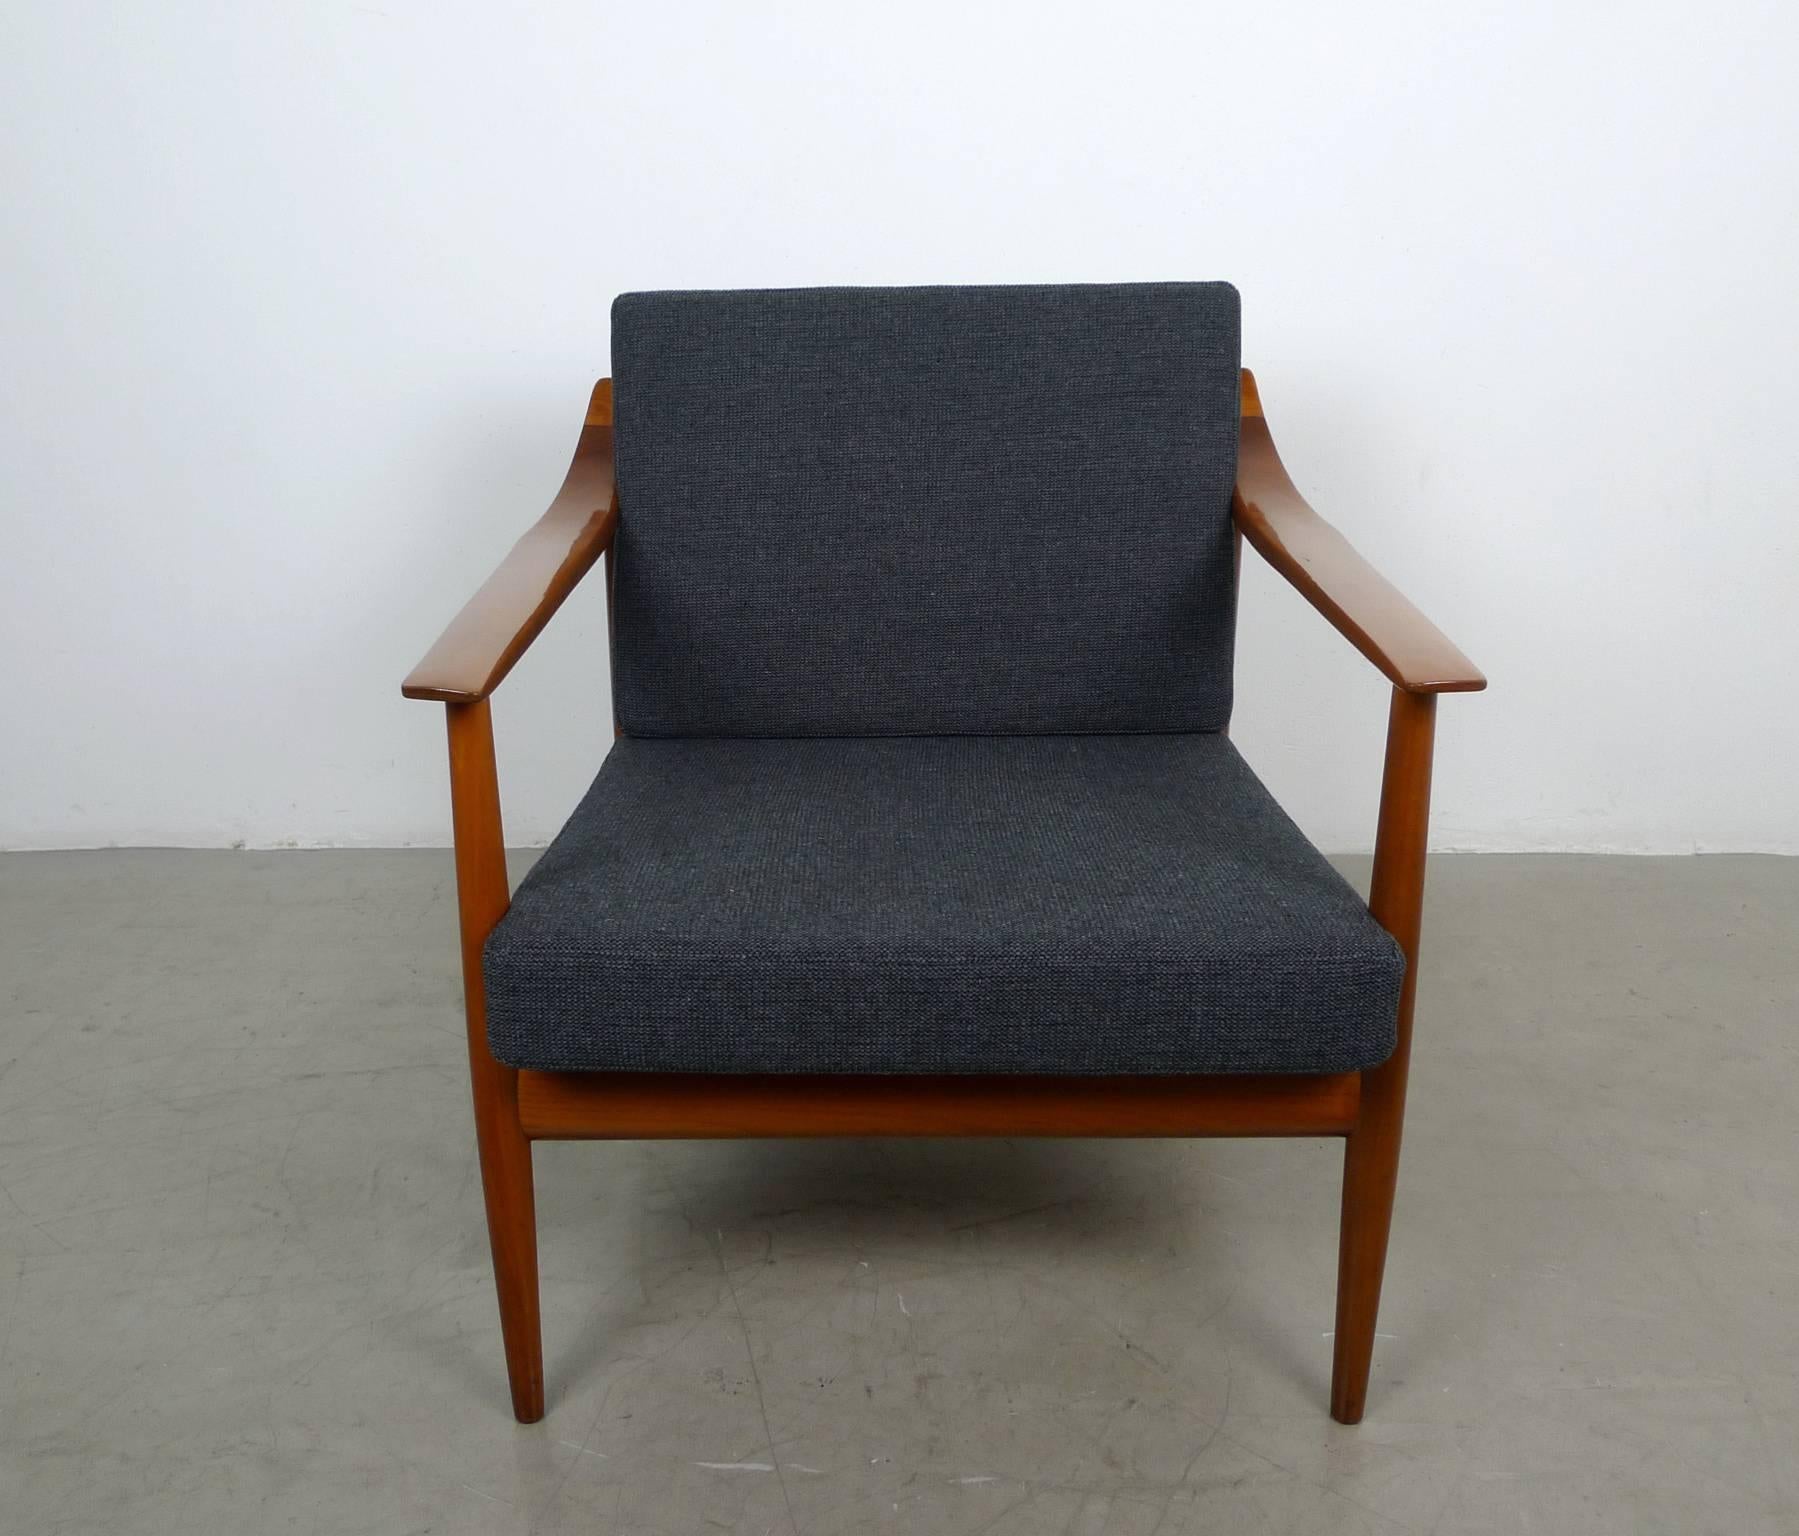 This 1950s armchair is from the German manufacturer Walter Knoll and features a filigree frame made of walnut. The chair is in very good condition, upholstery and fabric are renewed.